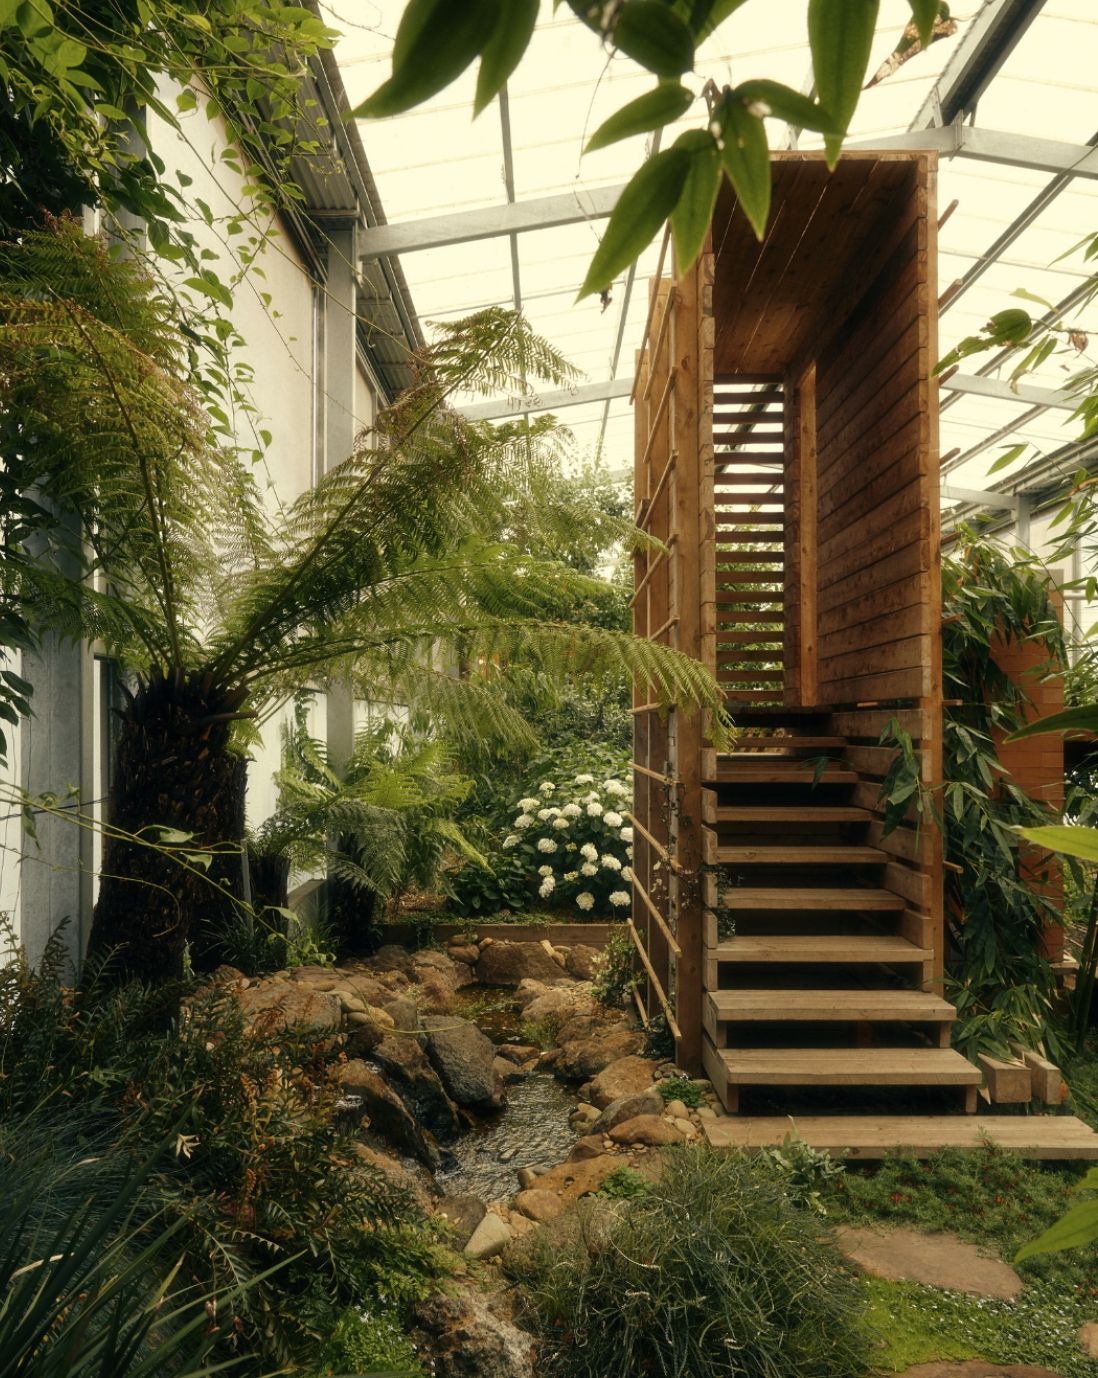 Green garden with wooden staircase in greenhouse